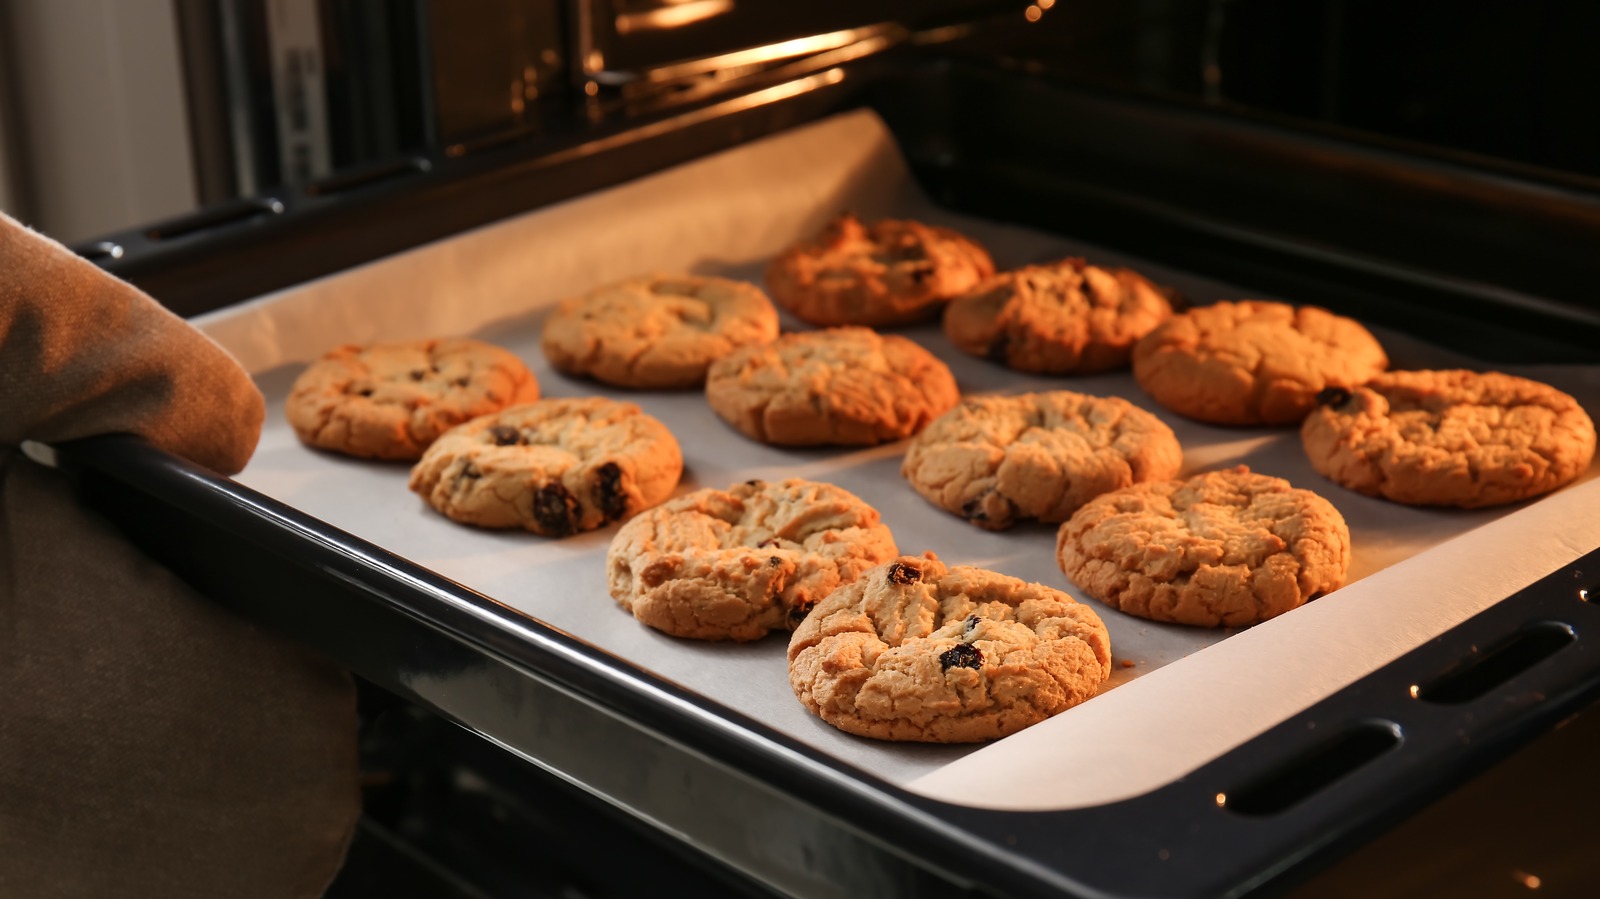 https://www.tastingtable.com/img/gallery/why-you-may-want-to-avoid-insulated-cookie-sheets/l-intro-1668804573.jpg